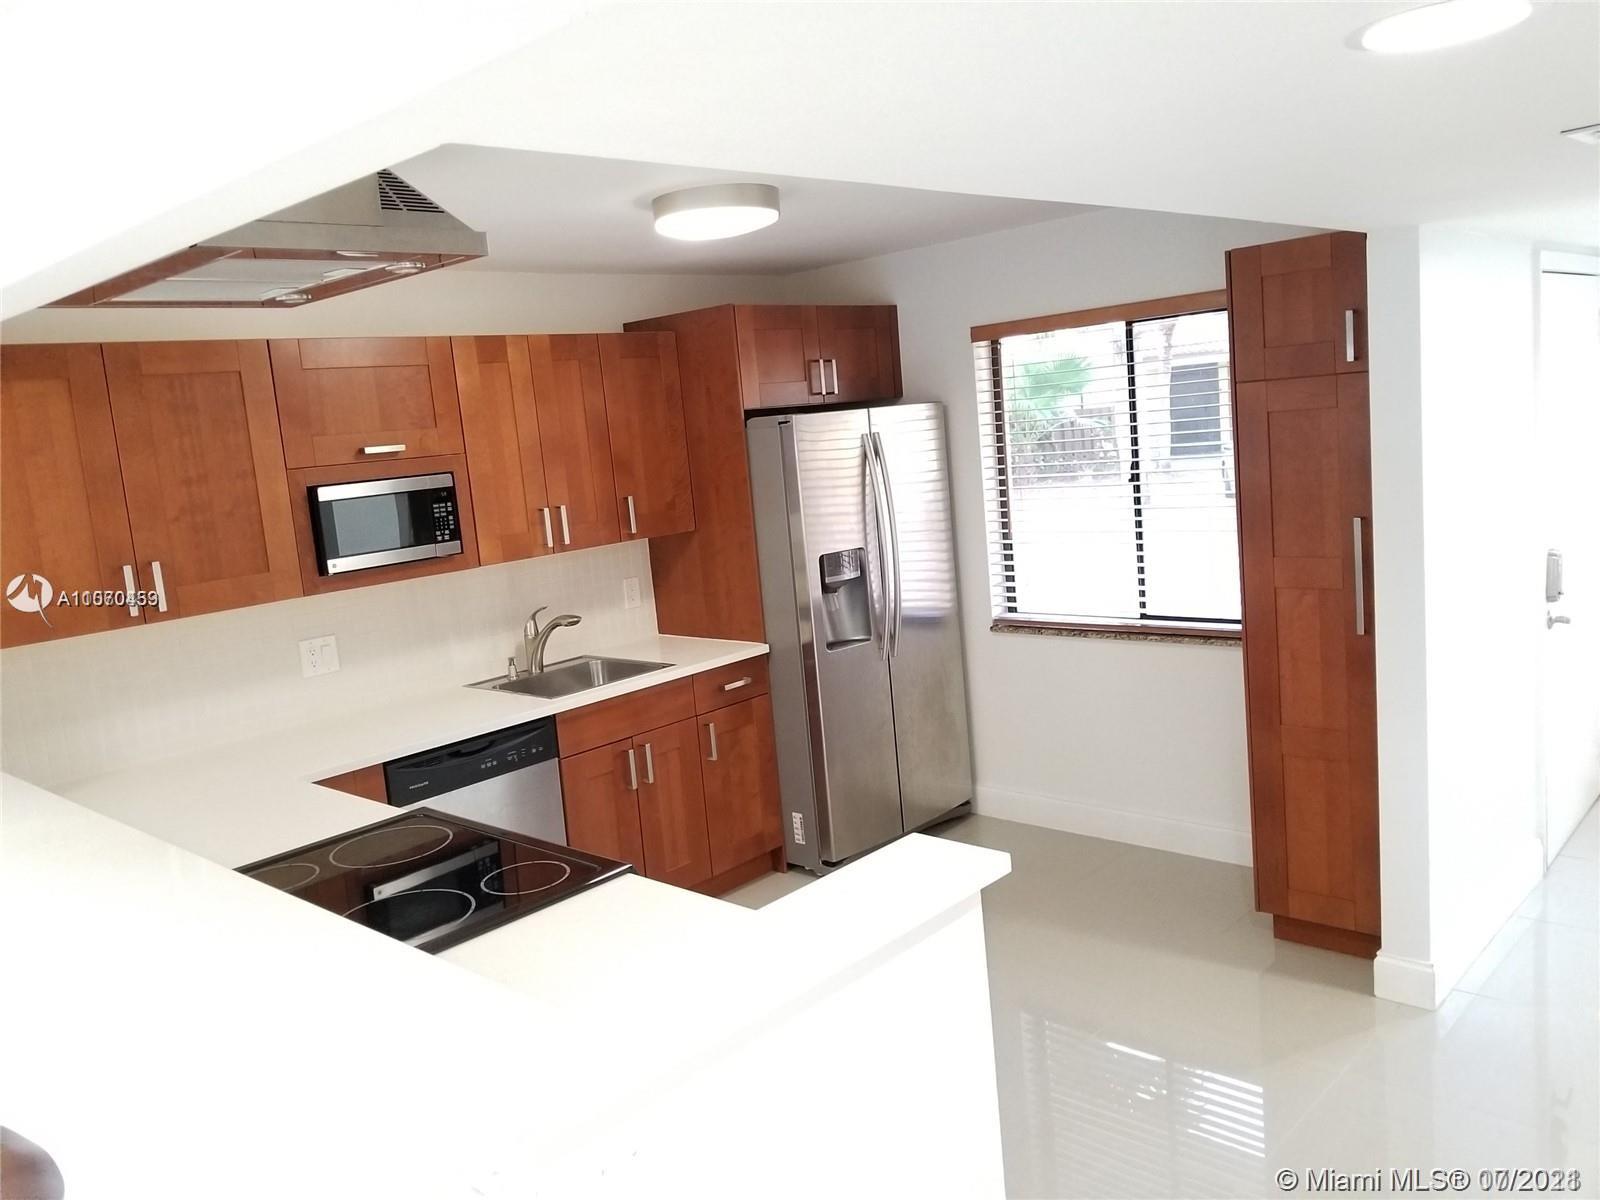 a kitchen with stainless steel appliances a sink a stove a refrigerator a microwave a counter top and cabinets